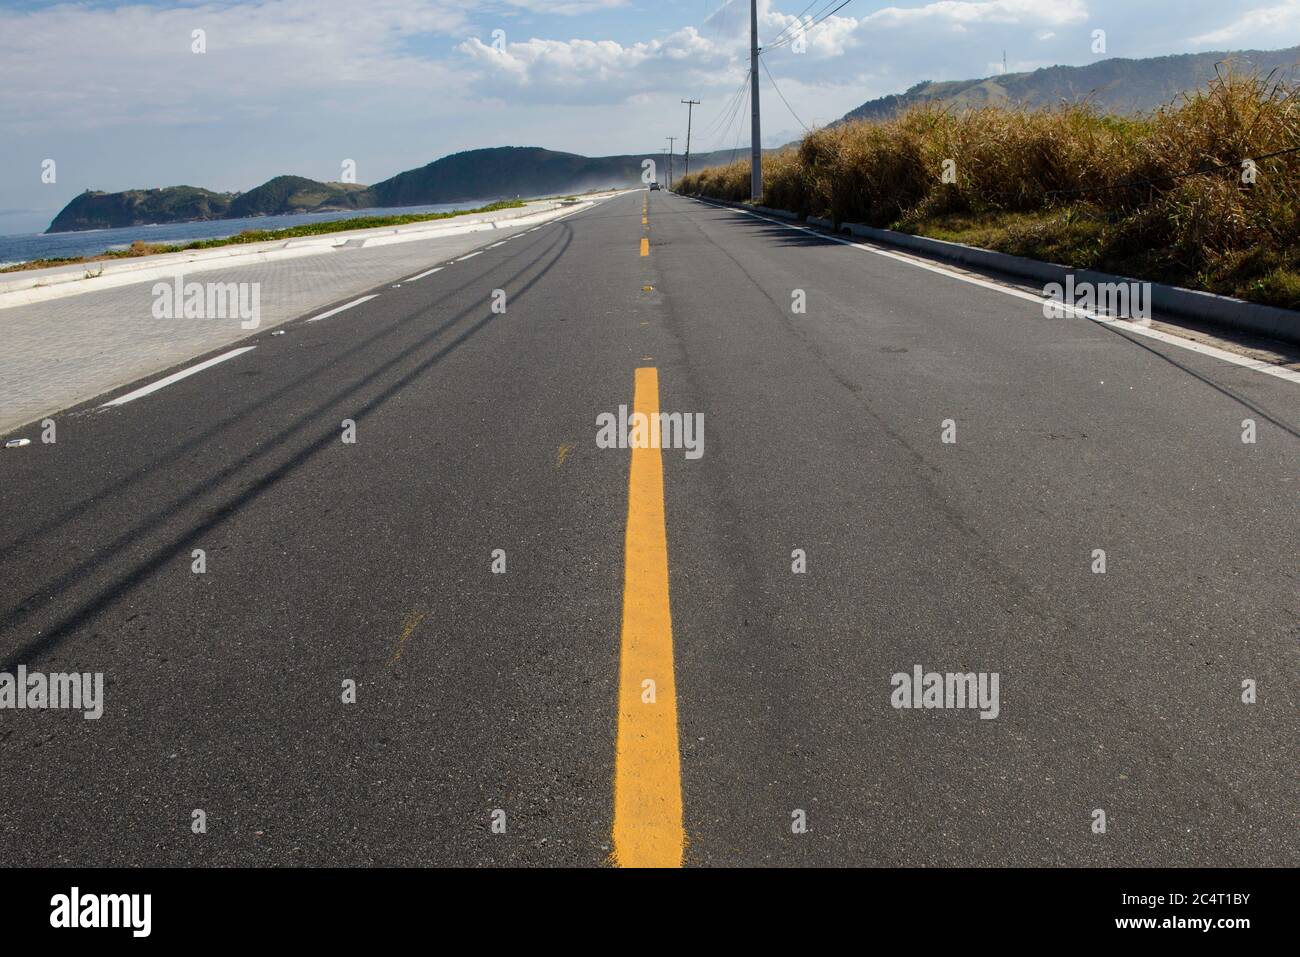 simple road with yellow strip dividing the lanes Stock Photo